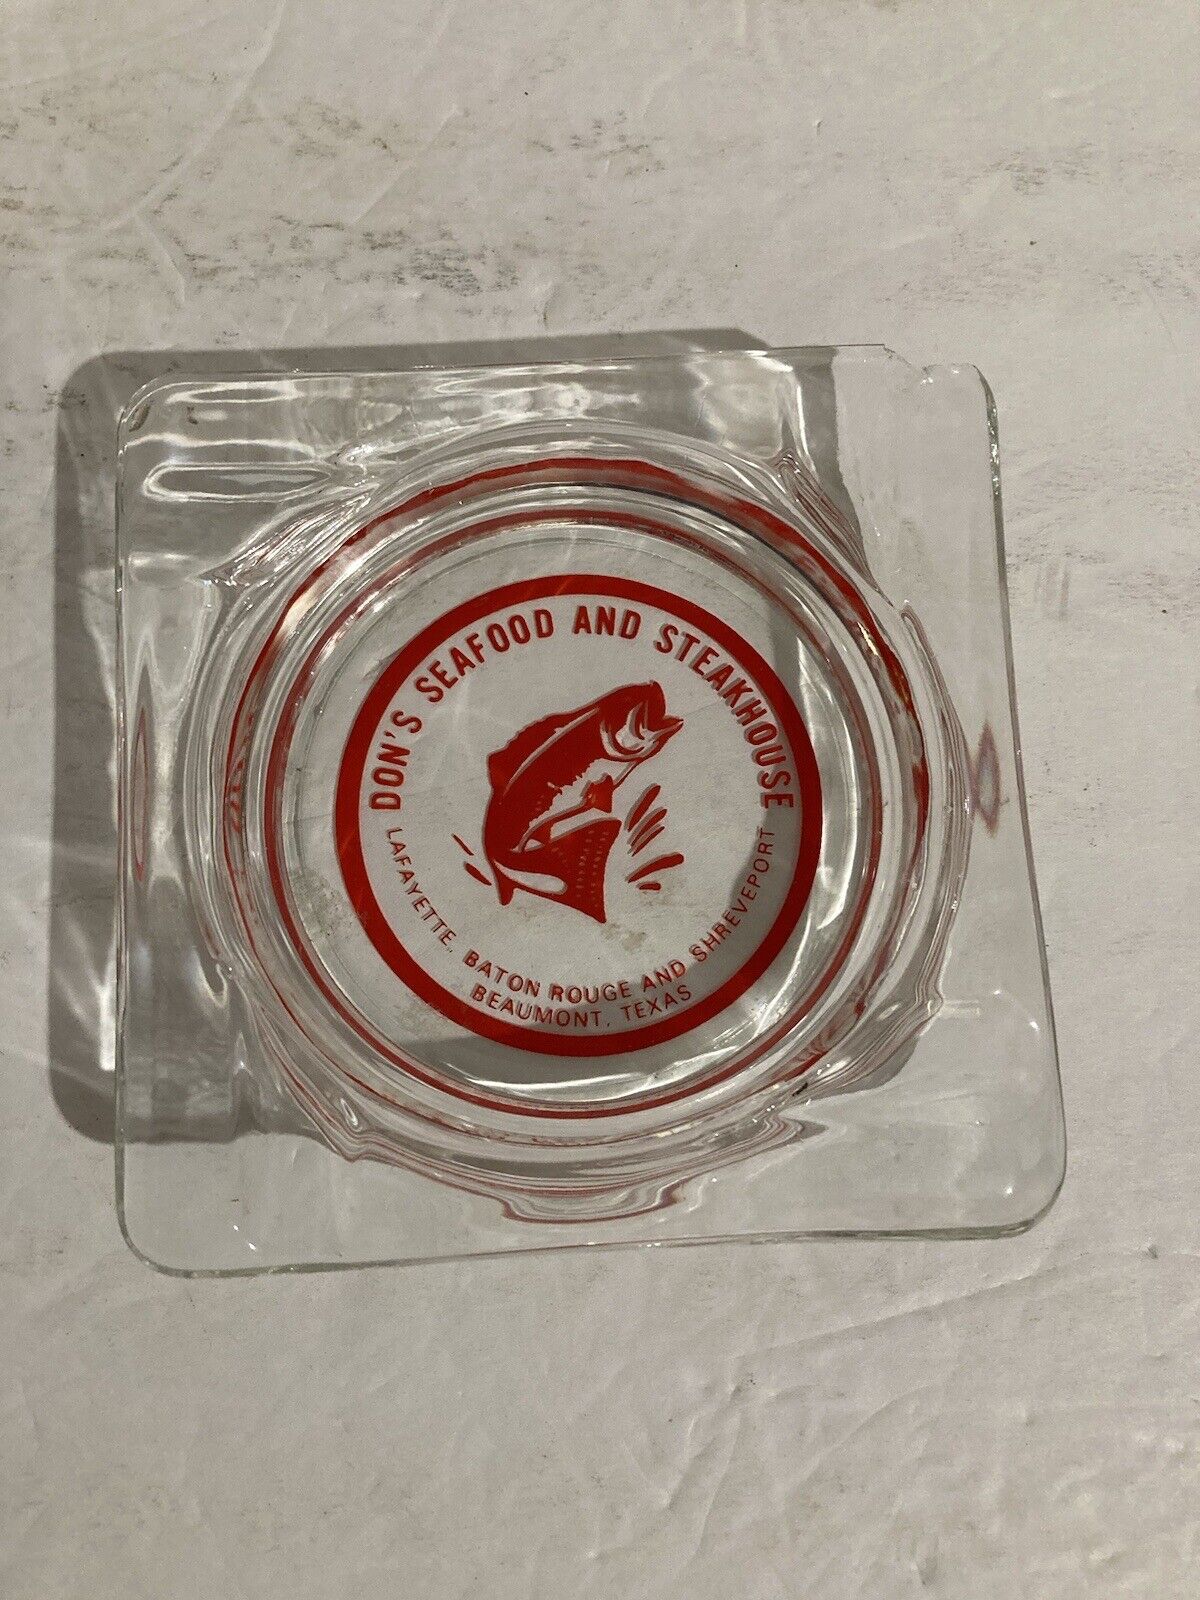 Vintage Don’s Seafood and Steakhouse ashtray Restaurant cigar cigarette smoking